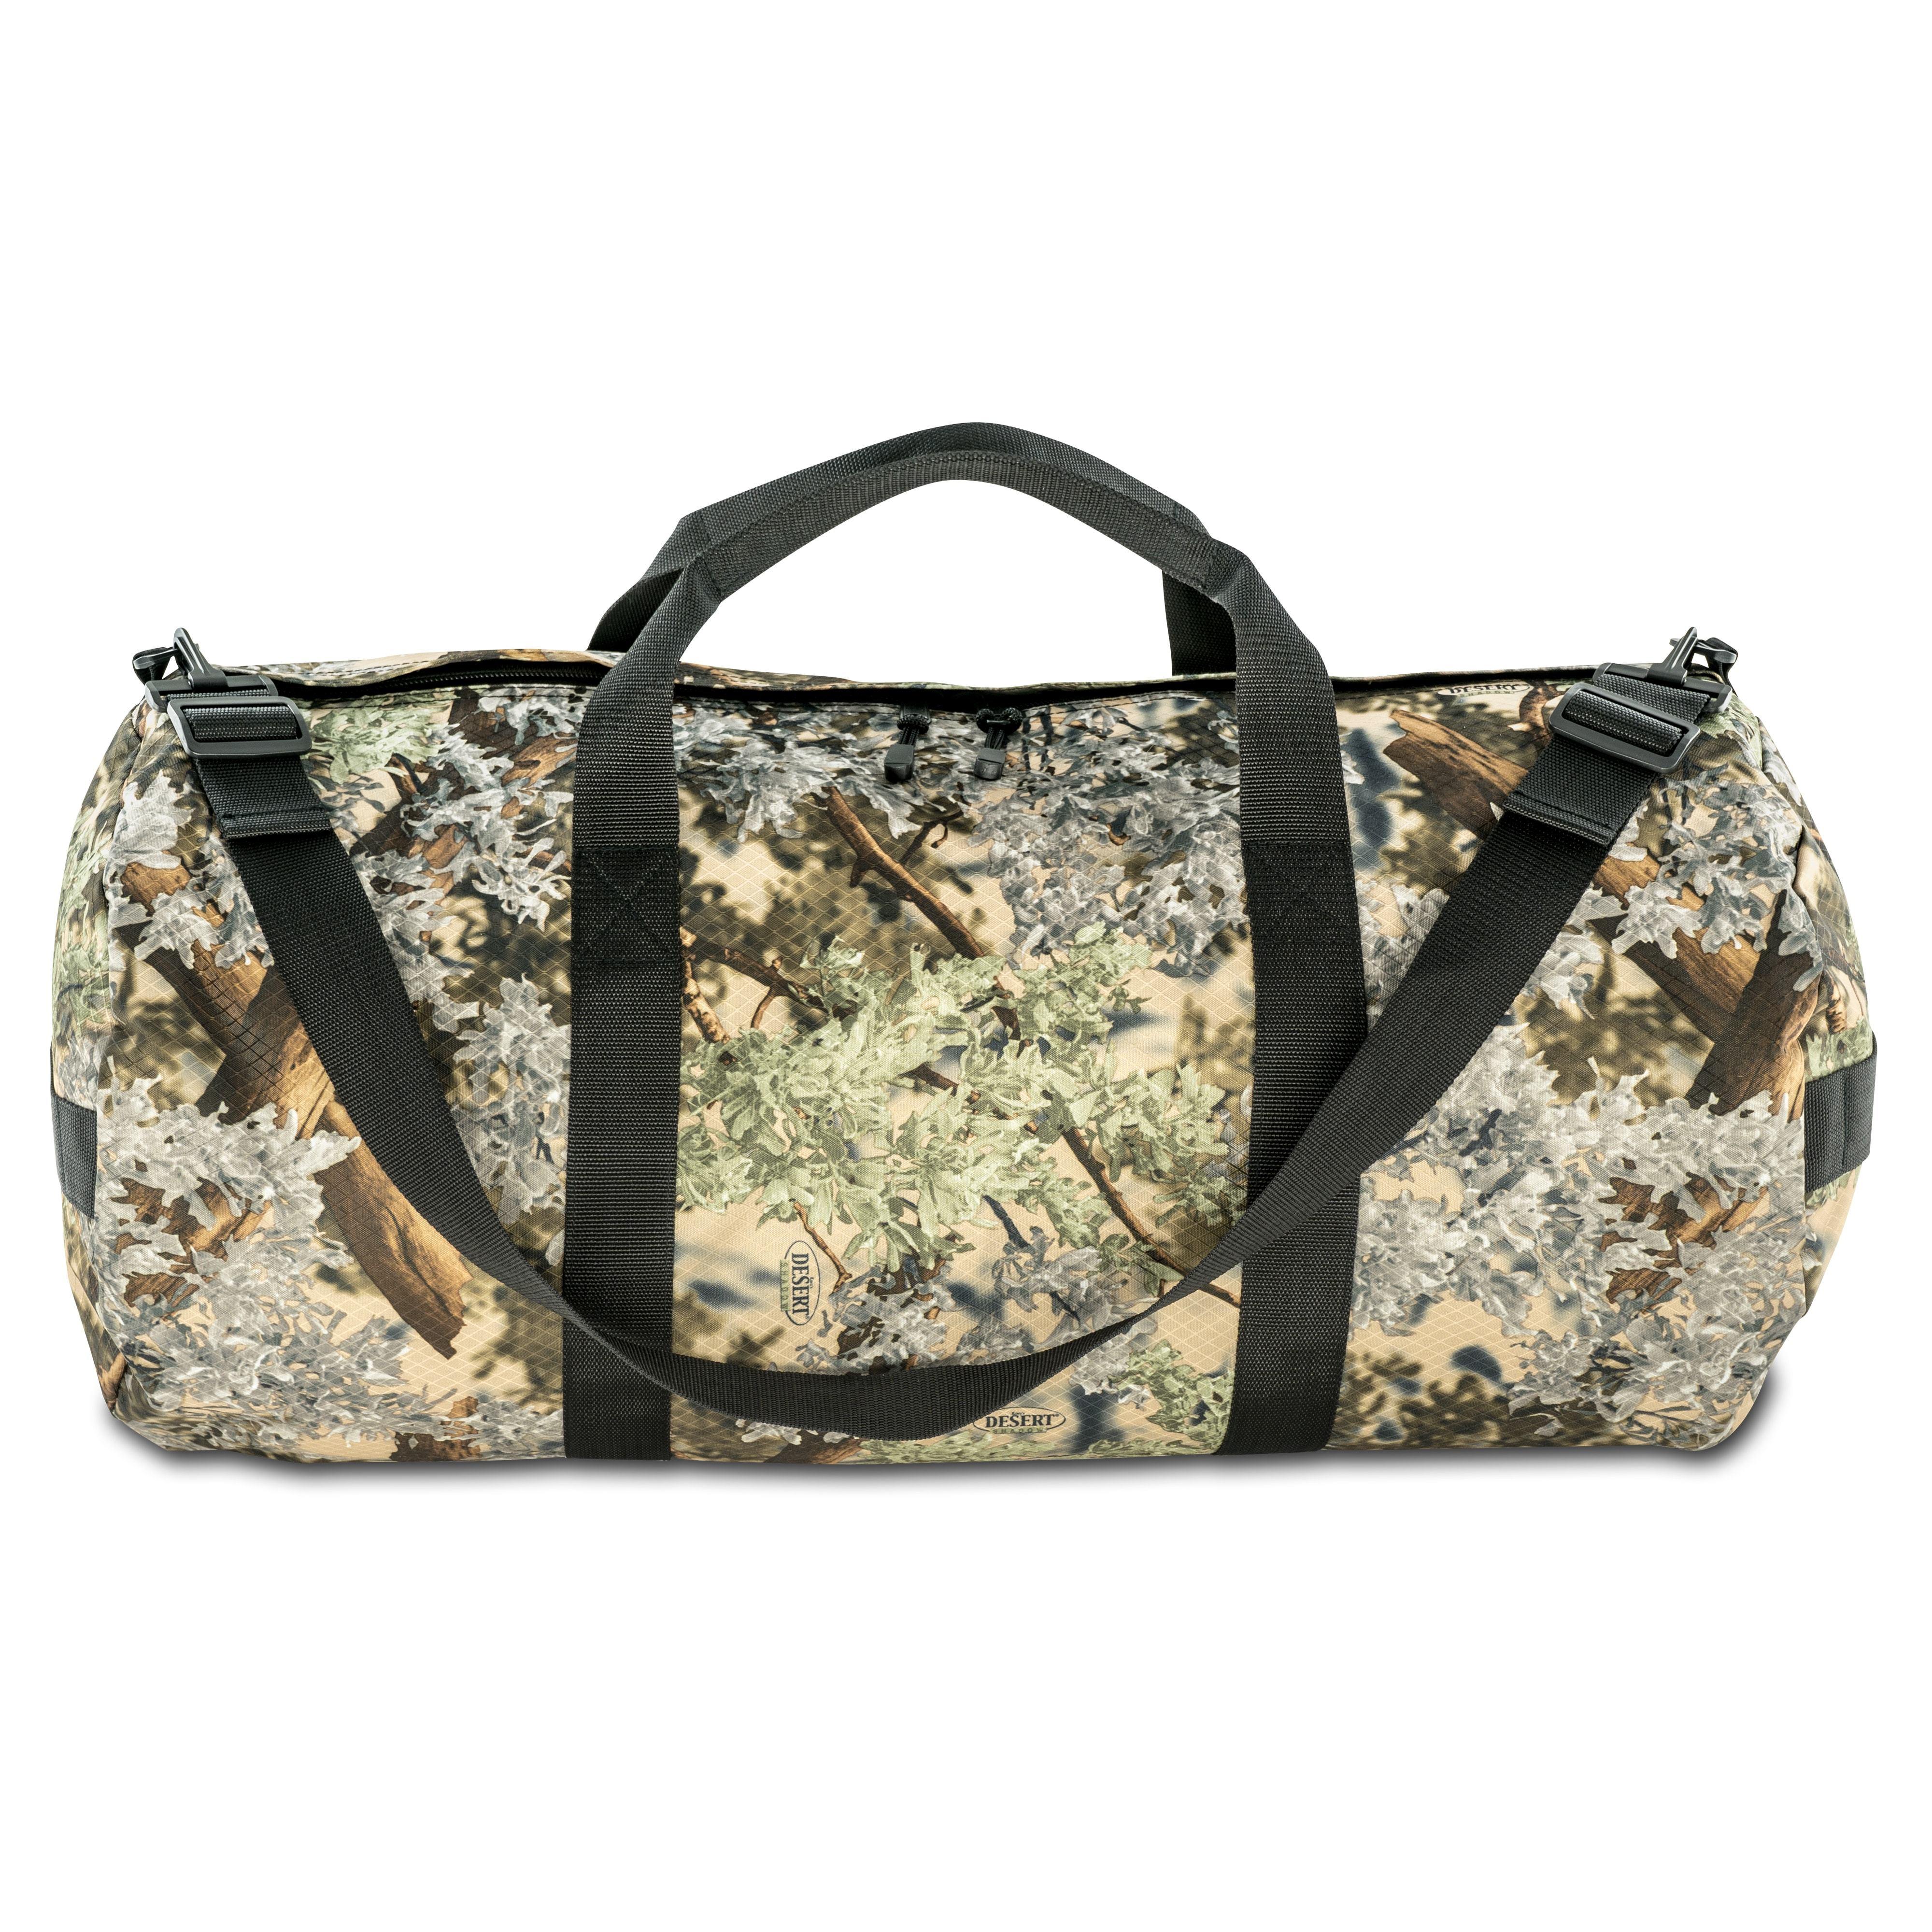 Studio photo of King's Camo Desert Shadow print SD1430DLX Standard Duffle by Northstar Bags. 75 liter duffel with diamond ripstop fabric, thick webbing straps, and a large format metal zipper. Guaranteed for life.